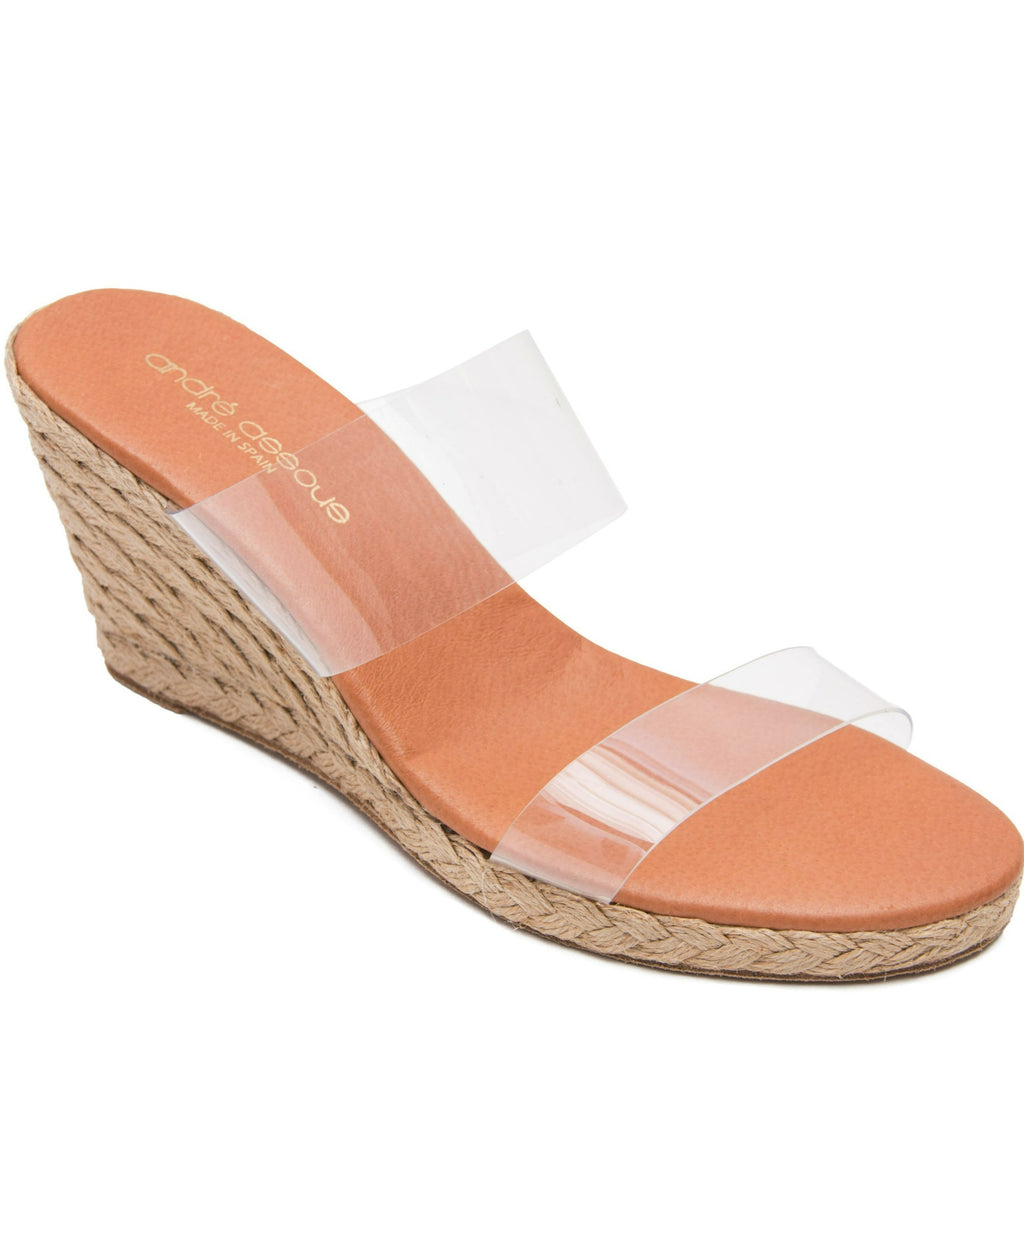 Anfisa Andre Assous Like walking on a cloud.  Clear-colored double straps that go with anything. Memory foam insoles so comfortable, you'll rush to wear these with everything. You will love these just-right height wedges, espadrille style. Skirt and dress friendly, too.